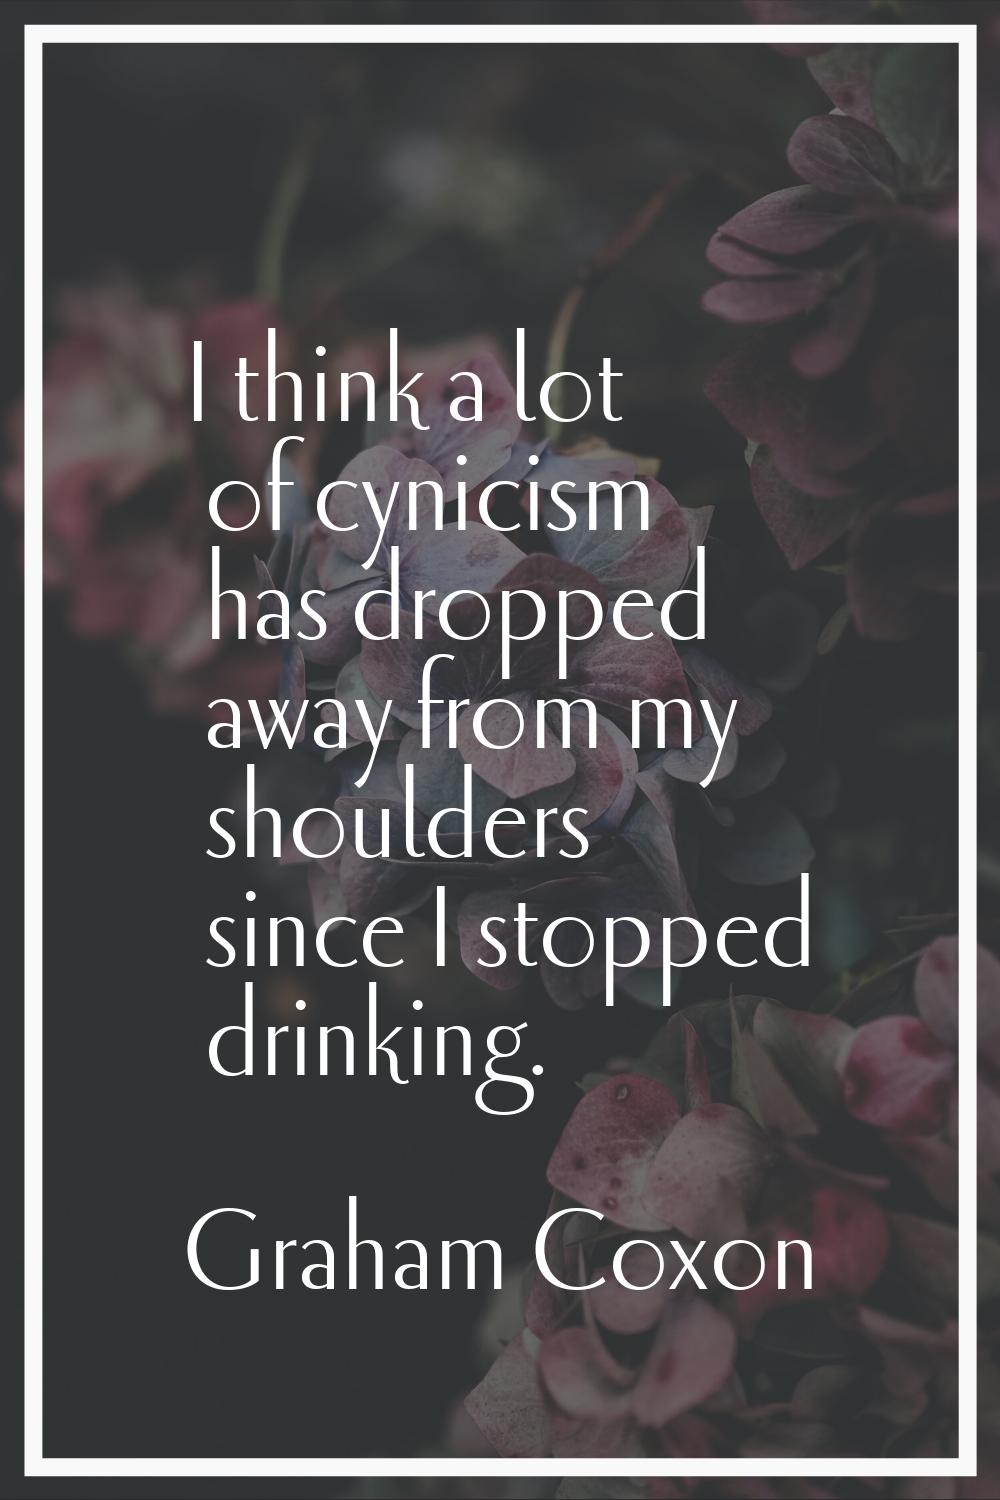 I think a lot of cynicism has dropped away from my shoulders since I stopped drinking.